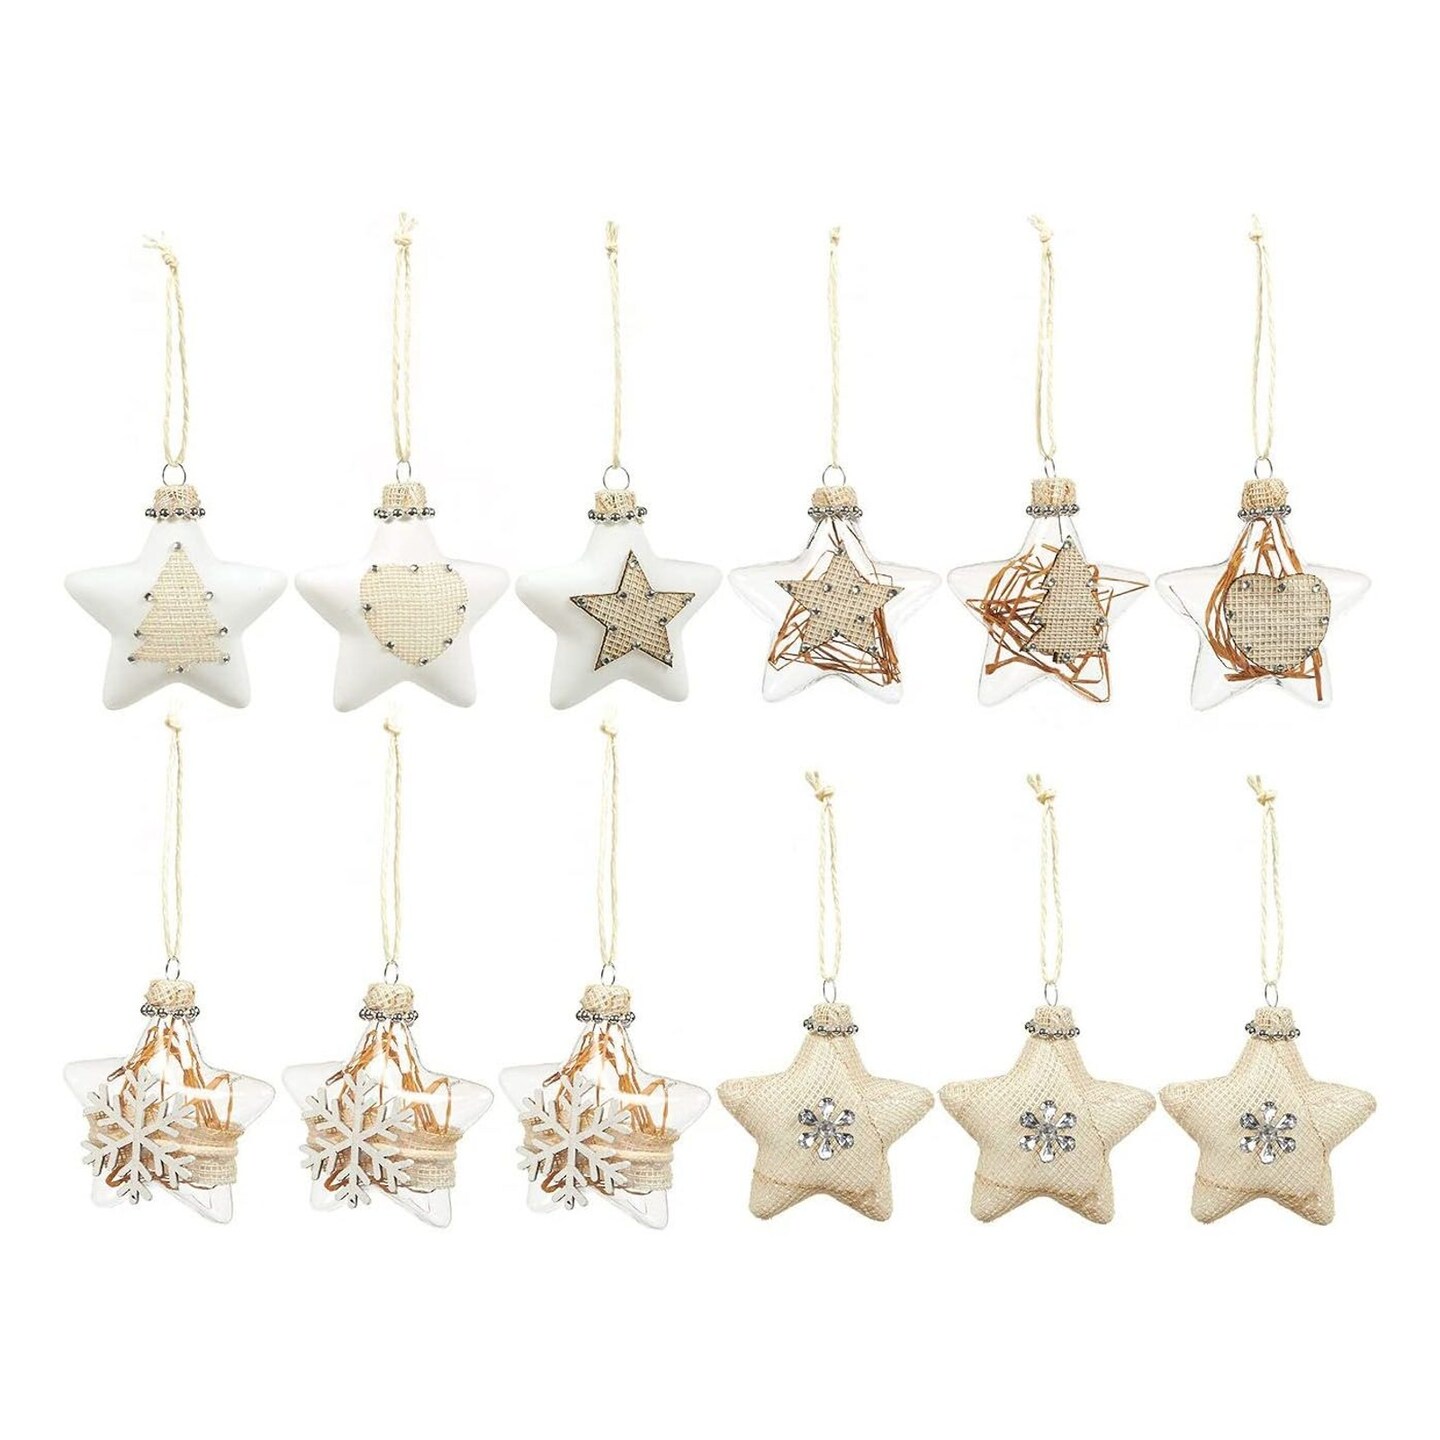 12 Pack Rustic Glass Star Ornaments for Christmas Tree, Hanging Decorations in Assorted Designs (3 x 6.2 x 1 In)